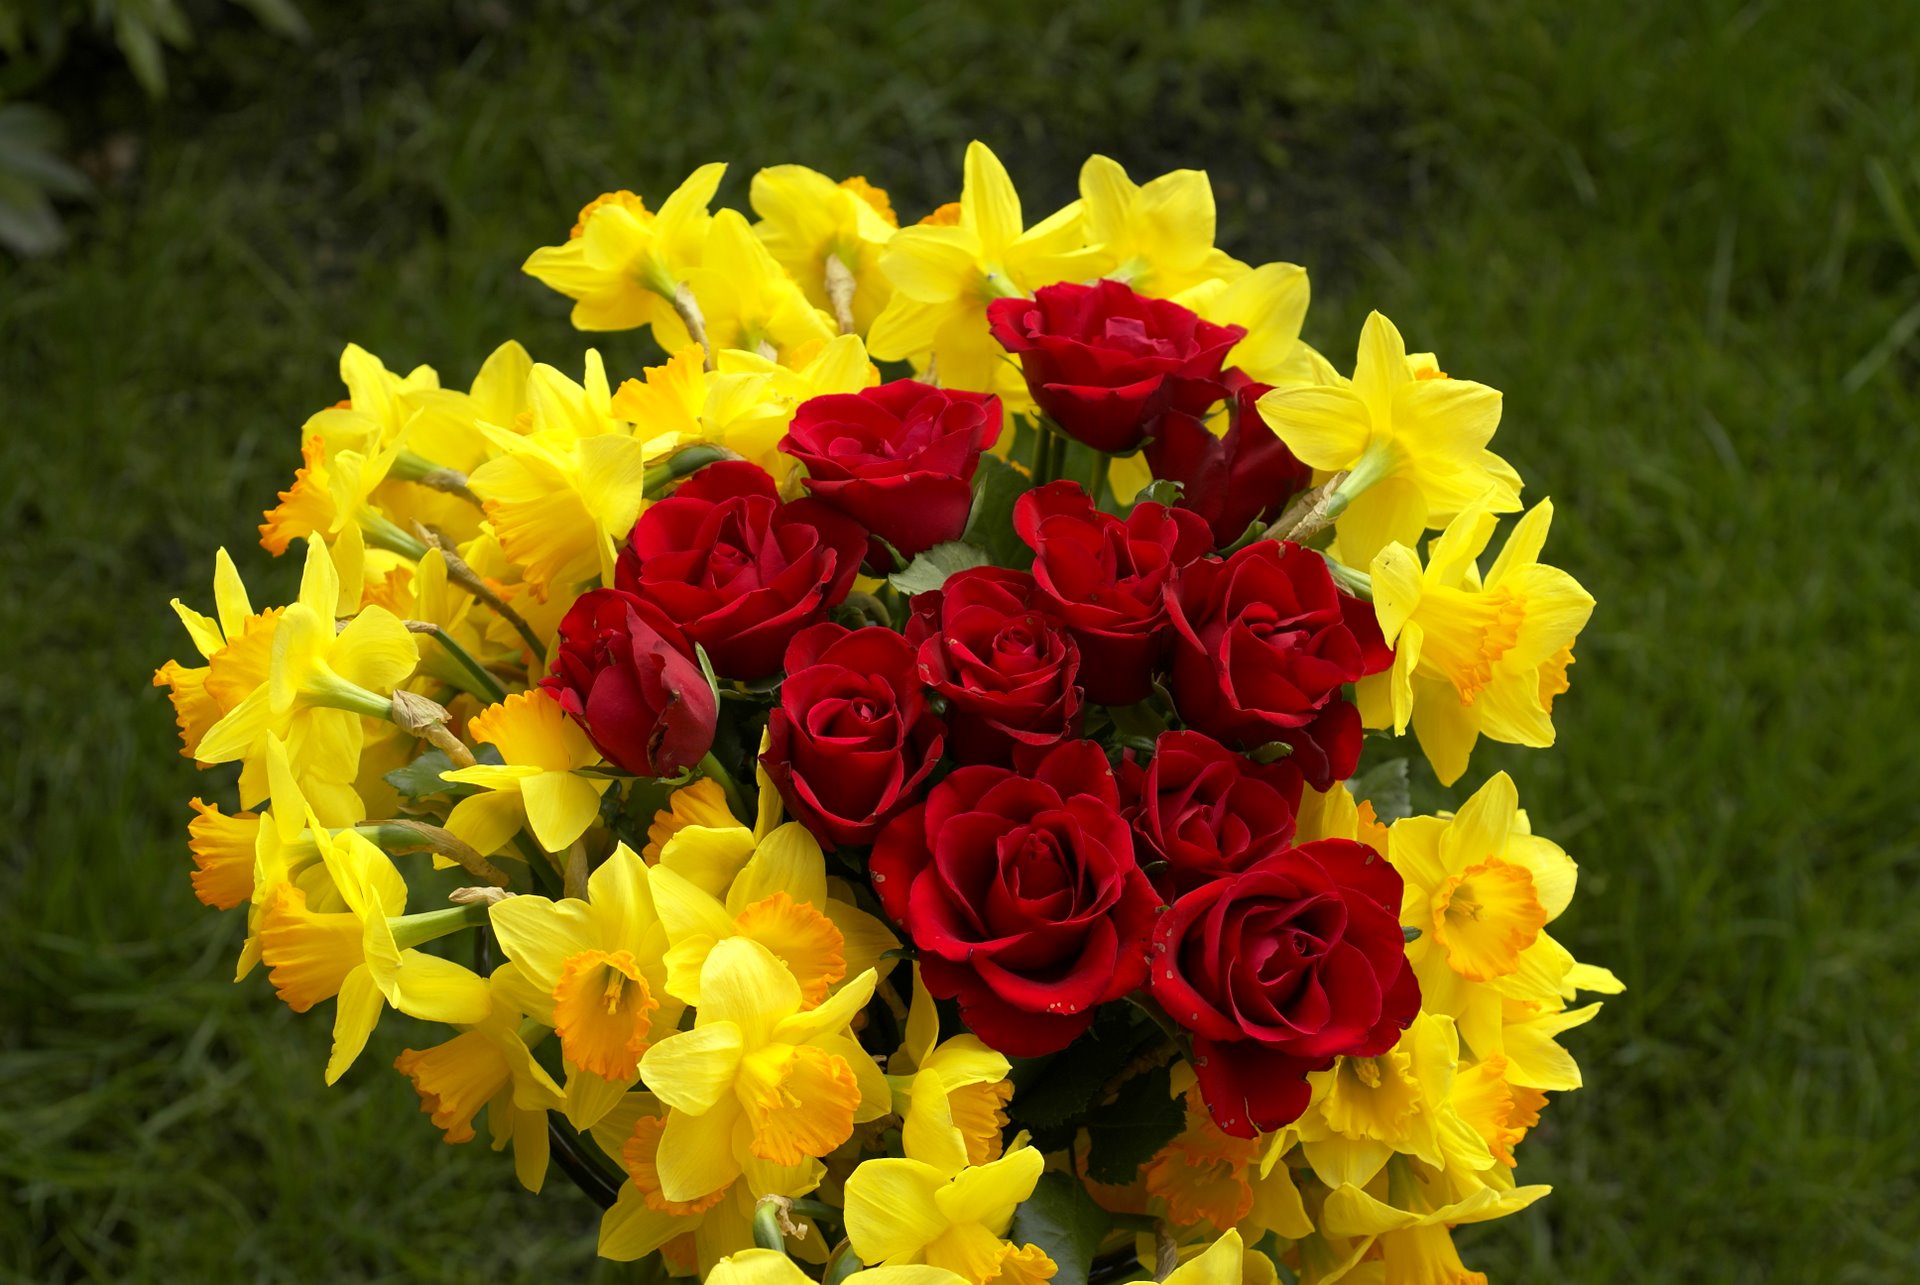 yellow narcissus and red roses